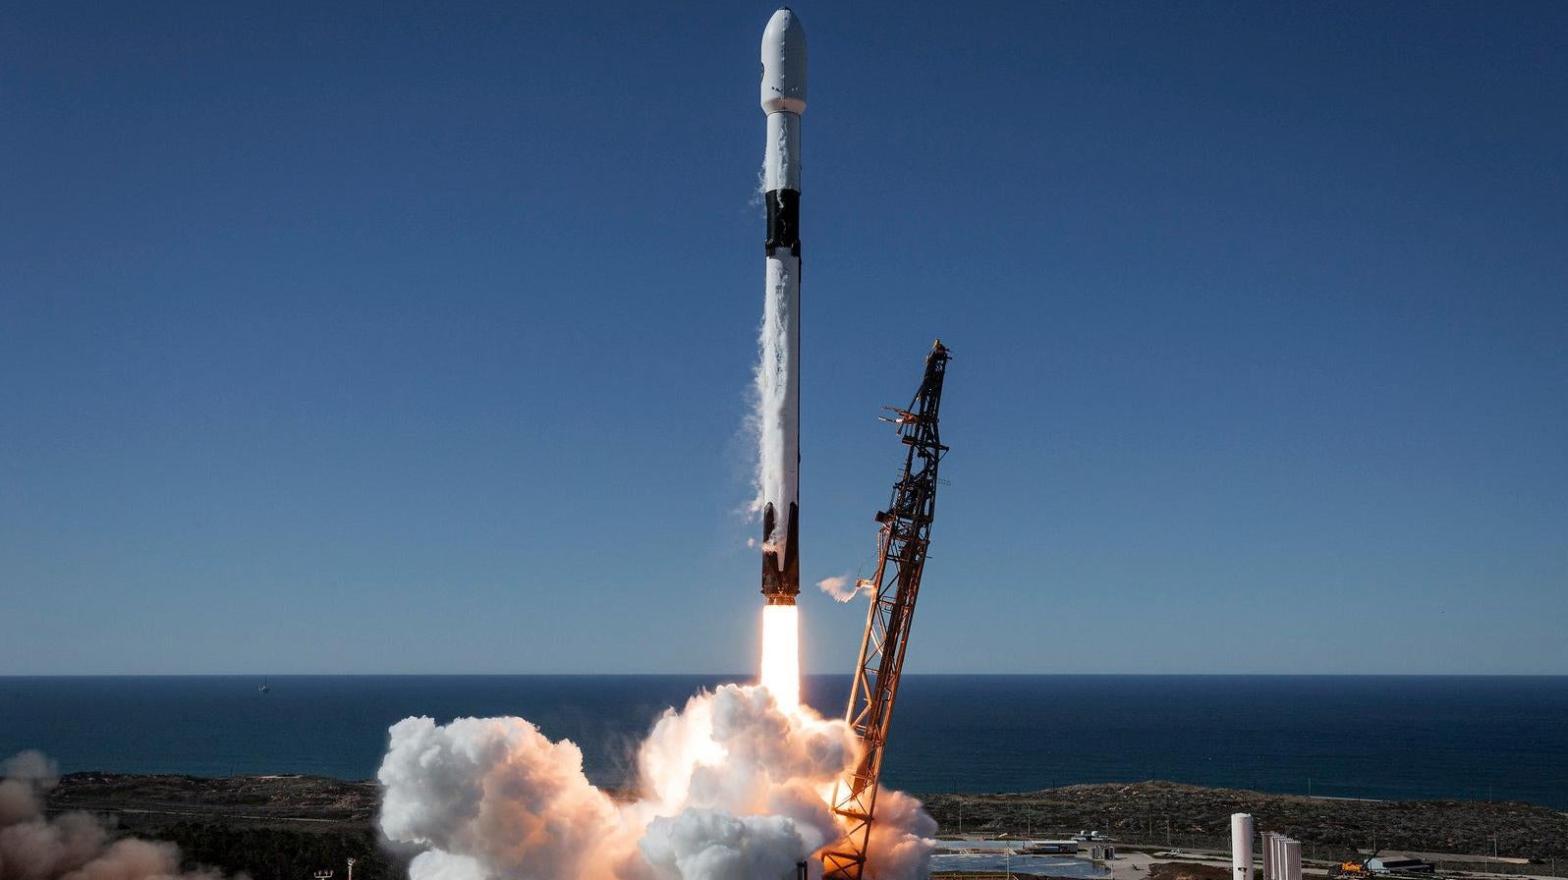 USA 326 satellite launched in February onboard a SpaceX Falcon 9 rocket. (Photo: SpaceX)